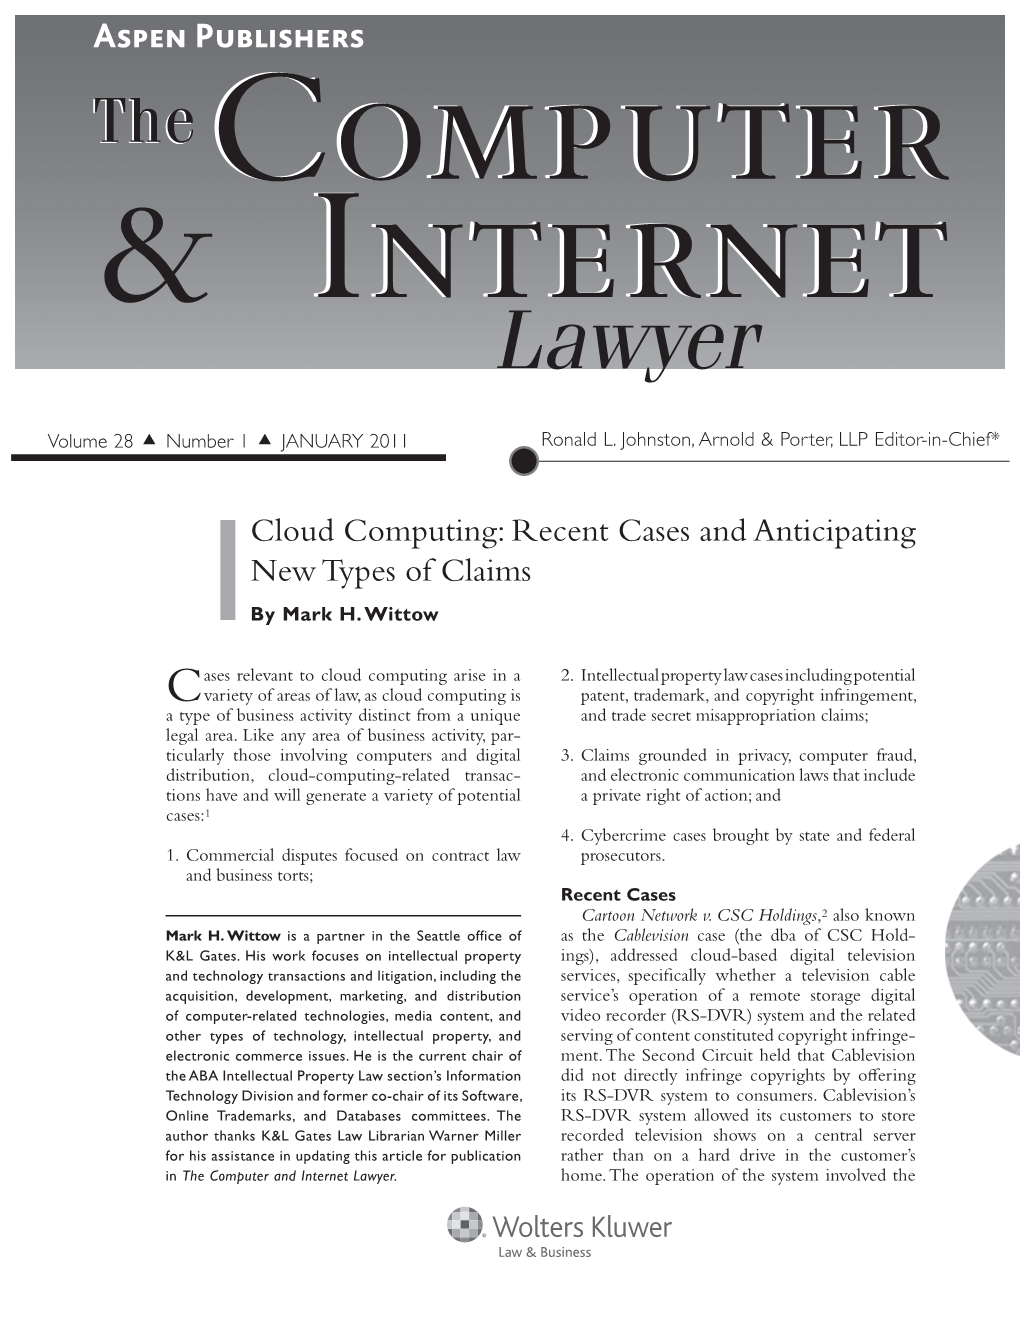 Cloud Computing: Recent Cases and Anticipating New Types of Claims by Mark H